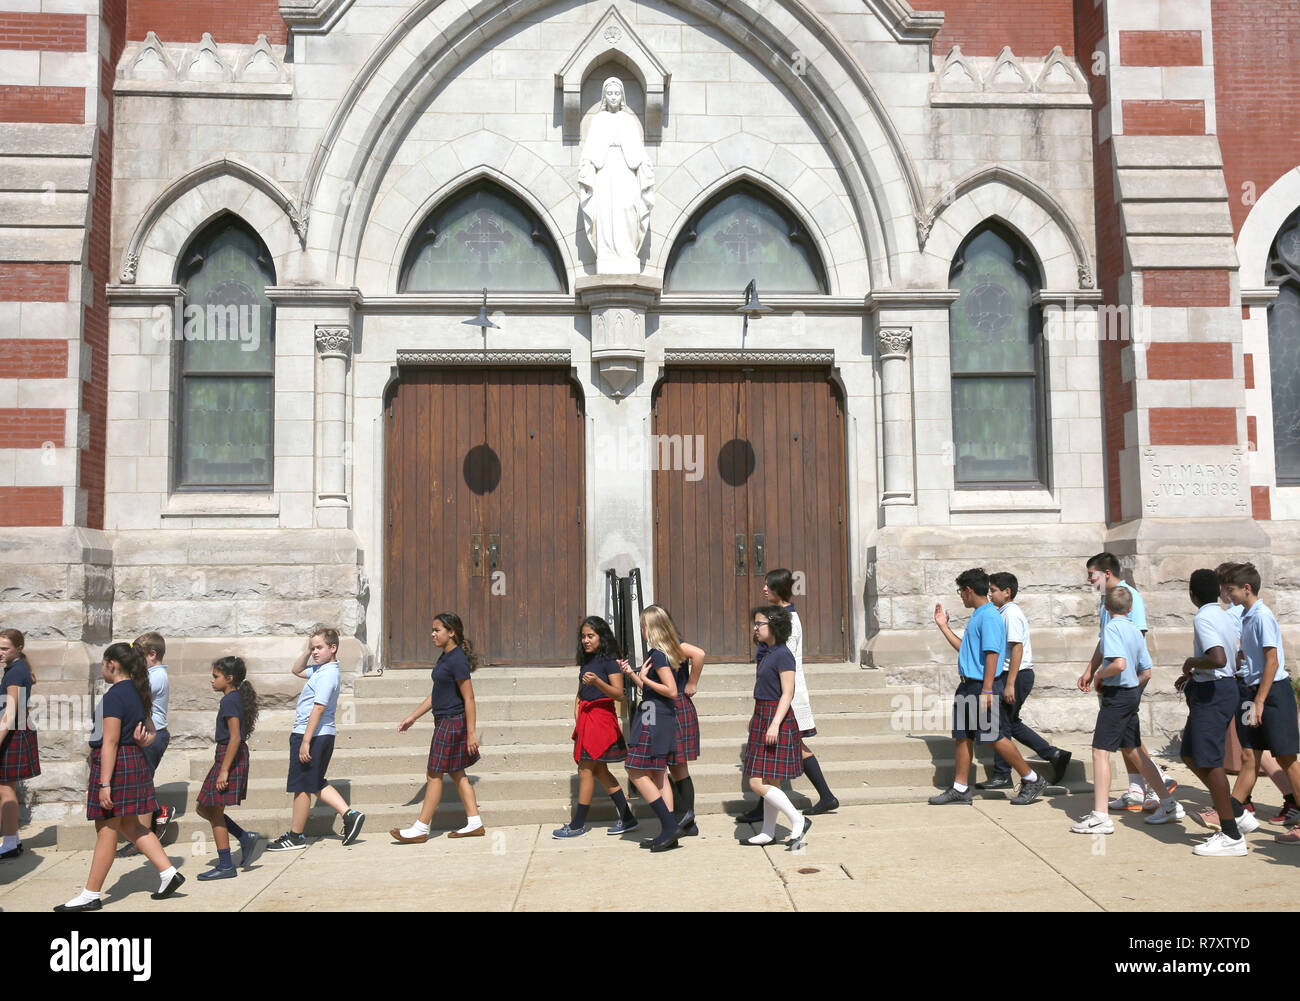 Primary school children and scenes at a religious Catholic school in the Chicago area in 2018. Stock Photo